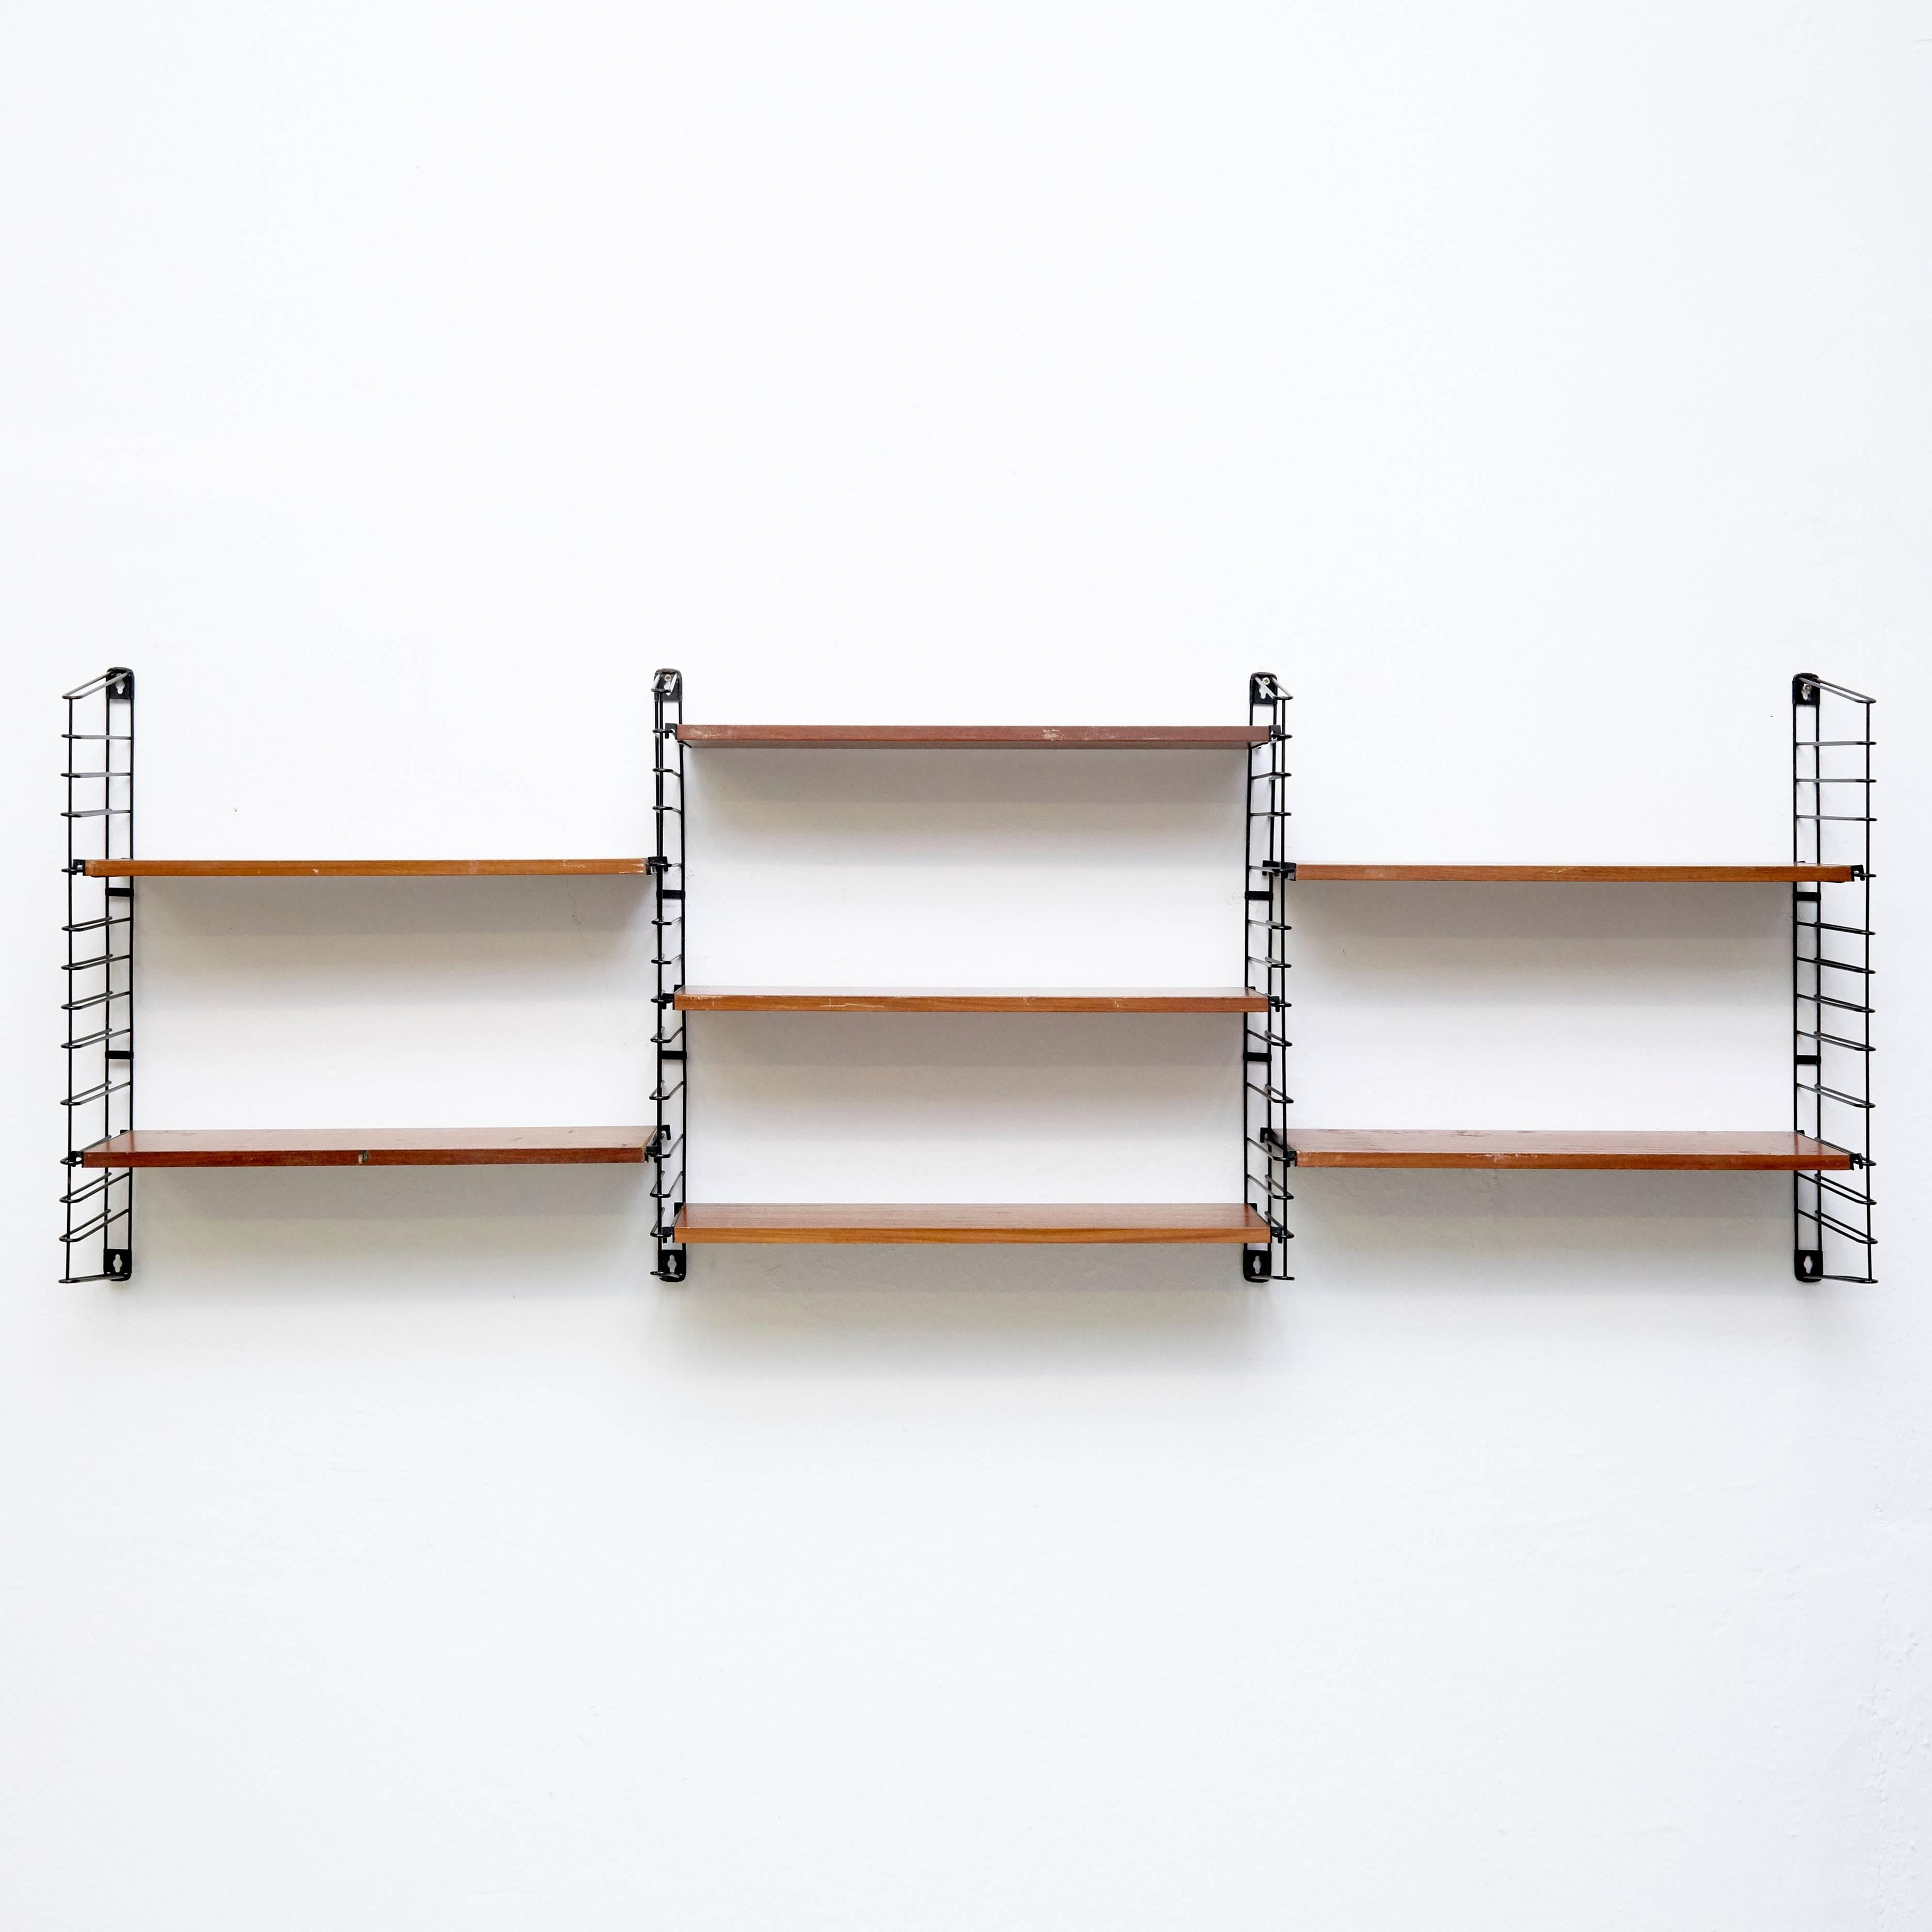 Modular shelves designed by Adriaan D. Dekker in 1958.
Manufactured by Tomado in The Netherlands.

It possible to fit multiple shelves together, thus achieving a personalized/modular shelving system.

In good original condition with minor wear